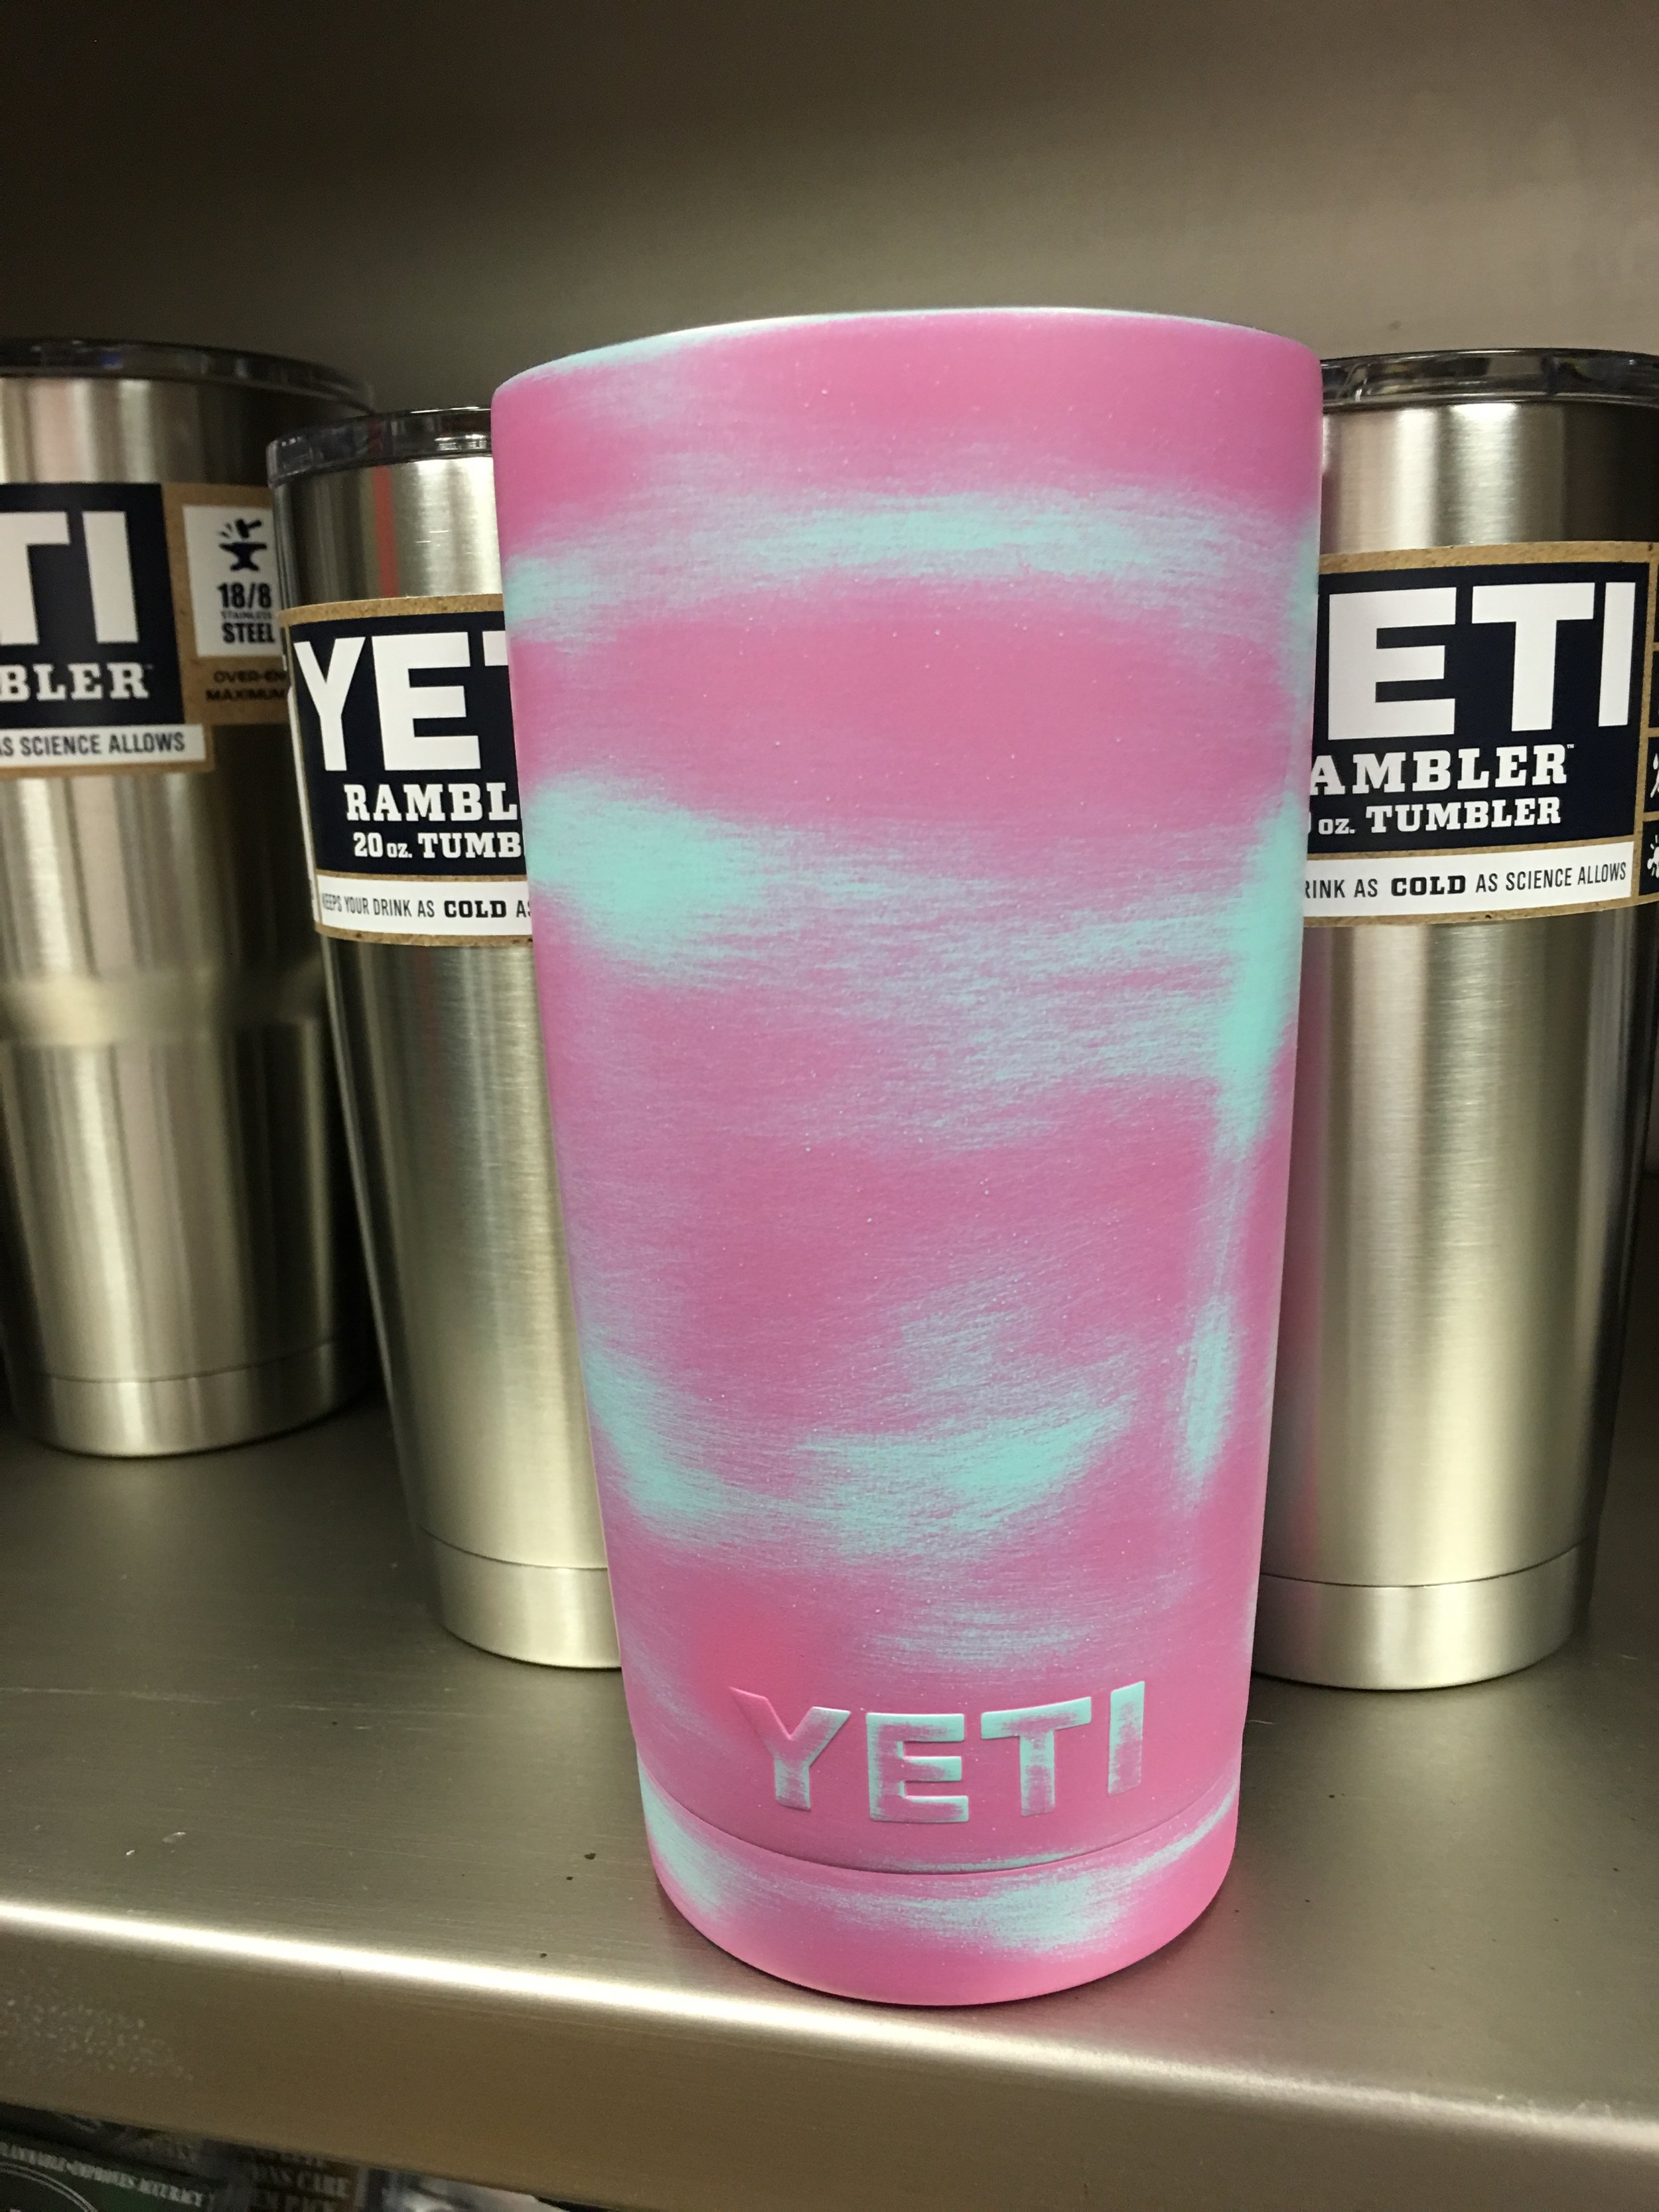 YETI Cup with a Cerakote Copper Patina Finish by Web User